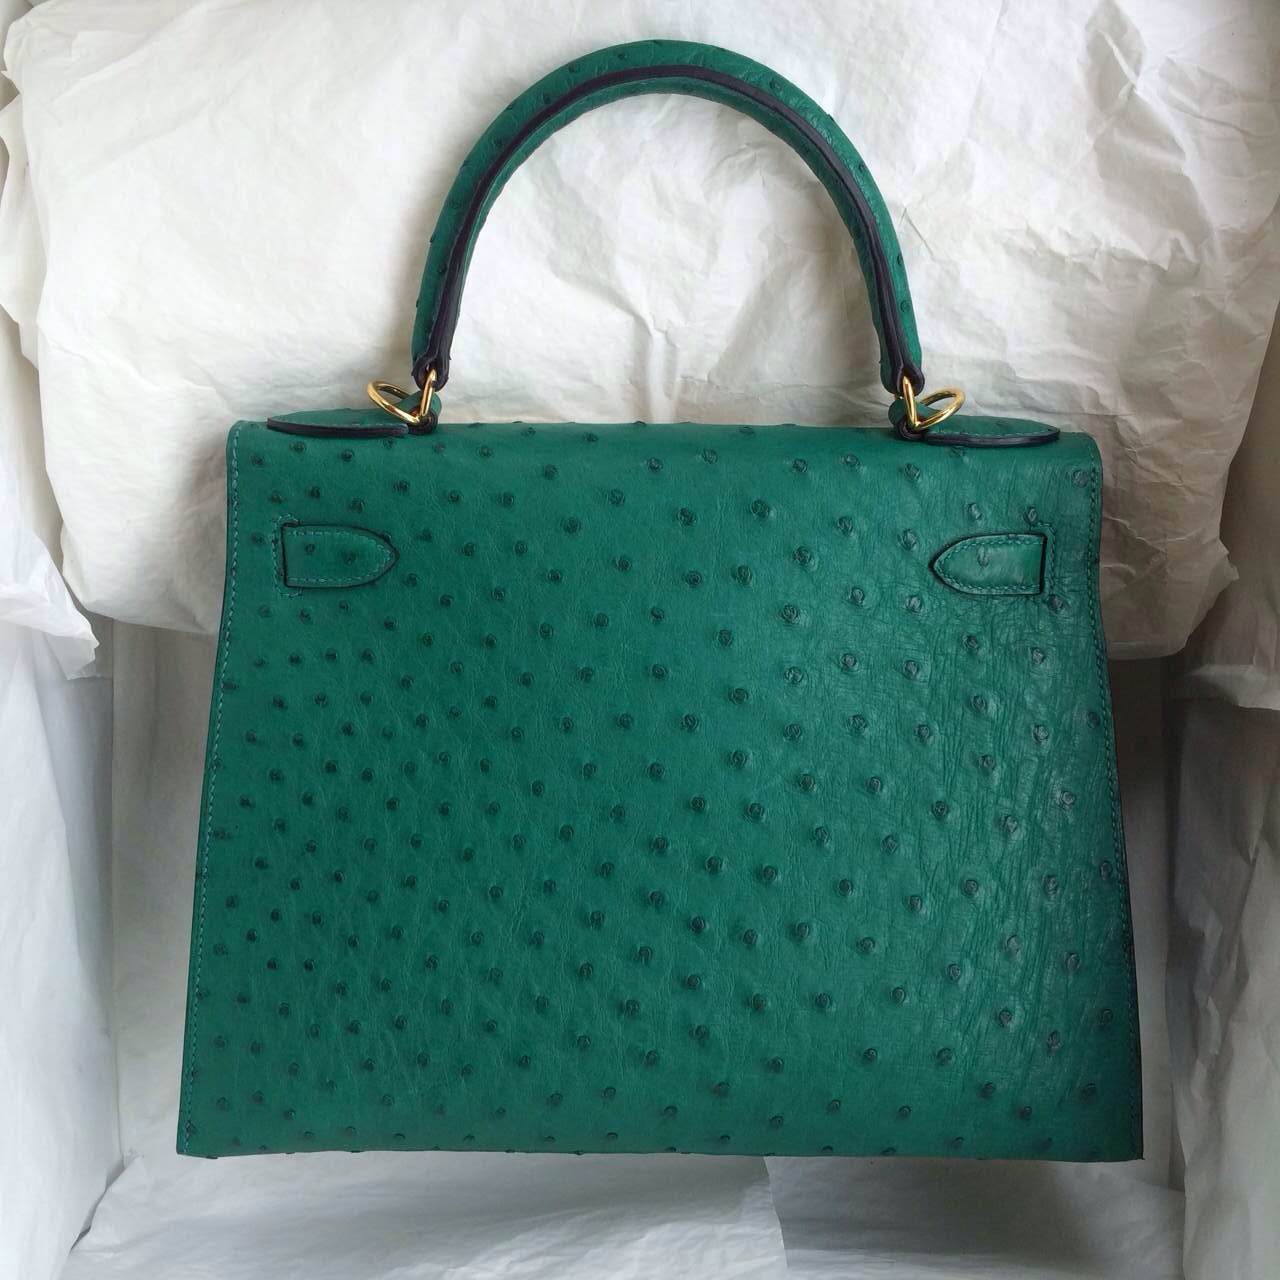 Z6 Malachite Color Ostrich Leather Hermes Kelly Bag 28cm Sellier ...  